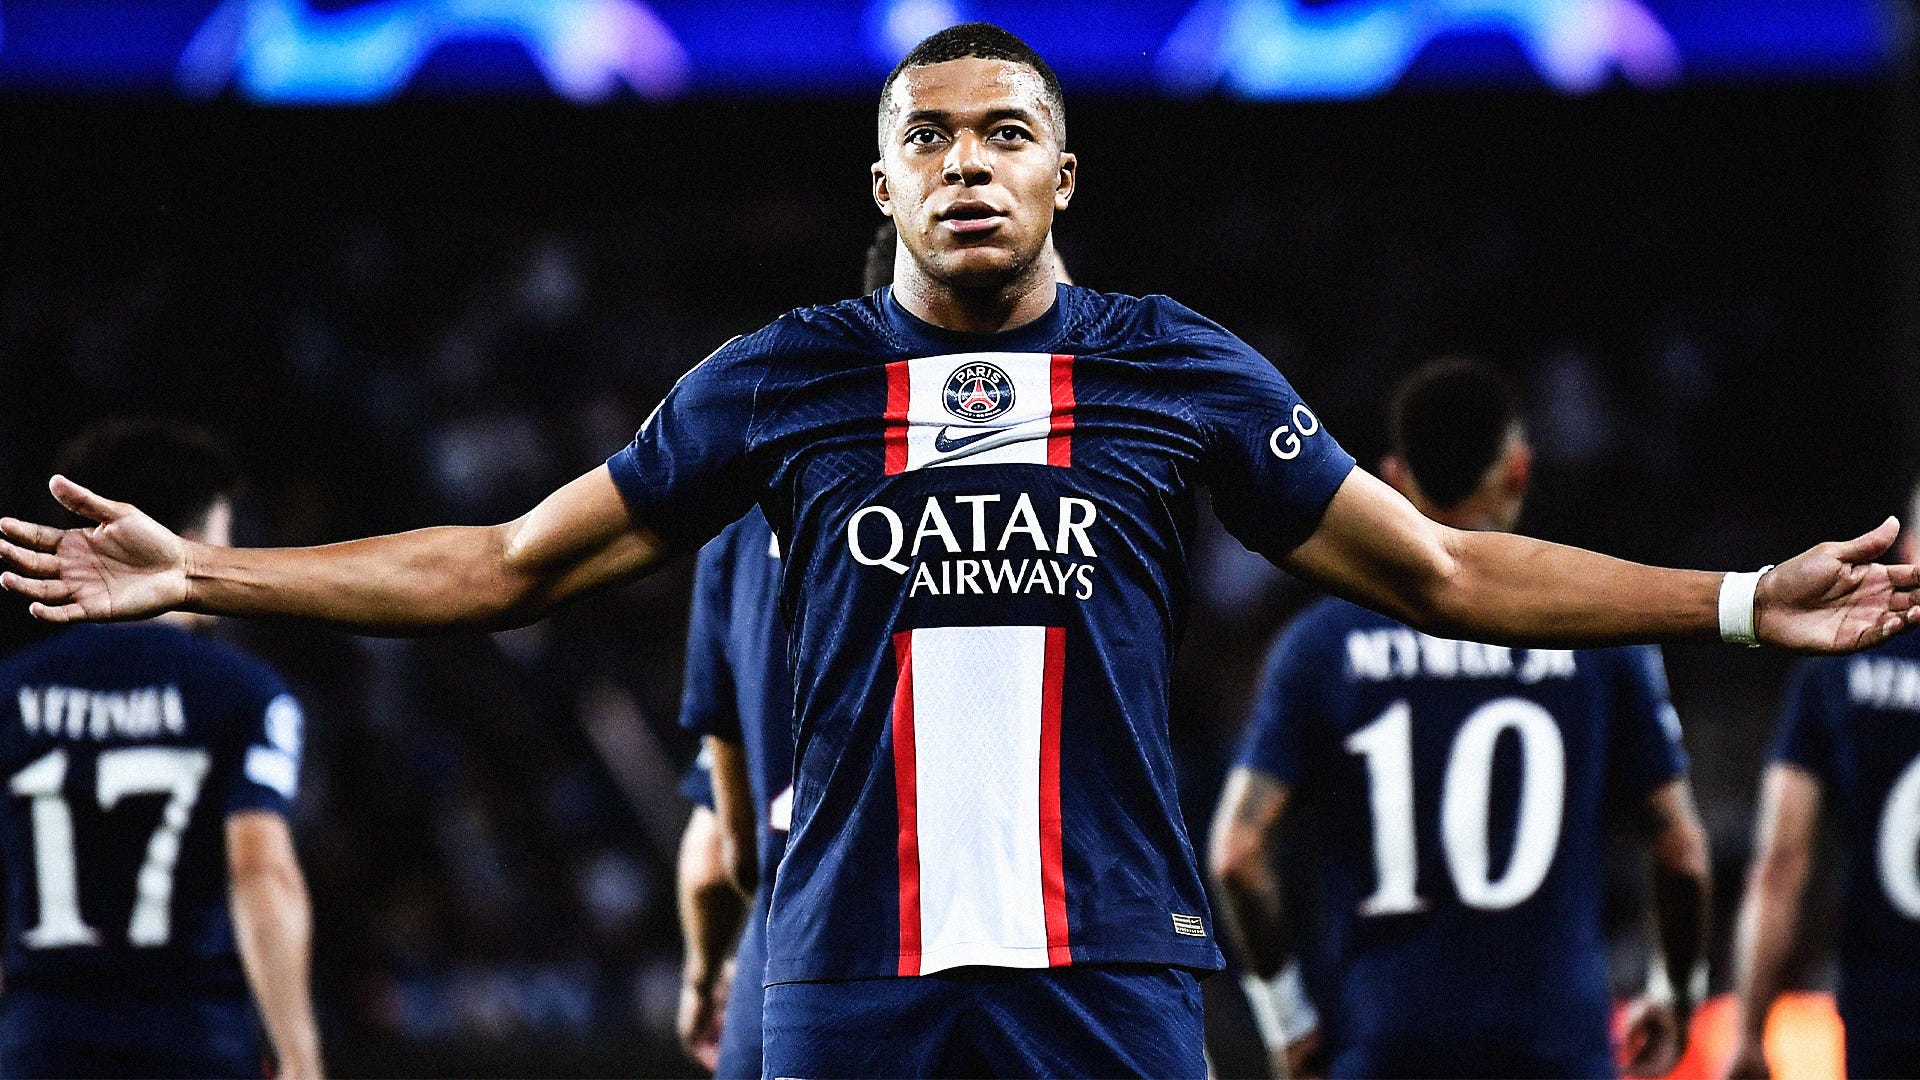  Kylian Mbappe is playing soccer for Paris Saint-Germain, wearing a blue and red jersey with white stripes, and celebrating a goal with his arms outstretched.